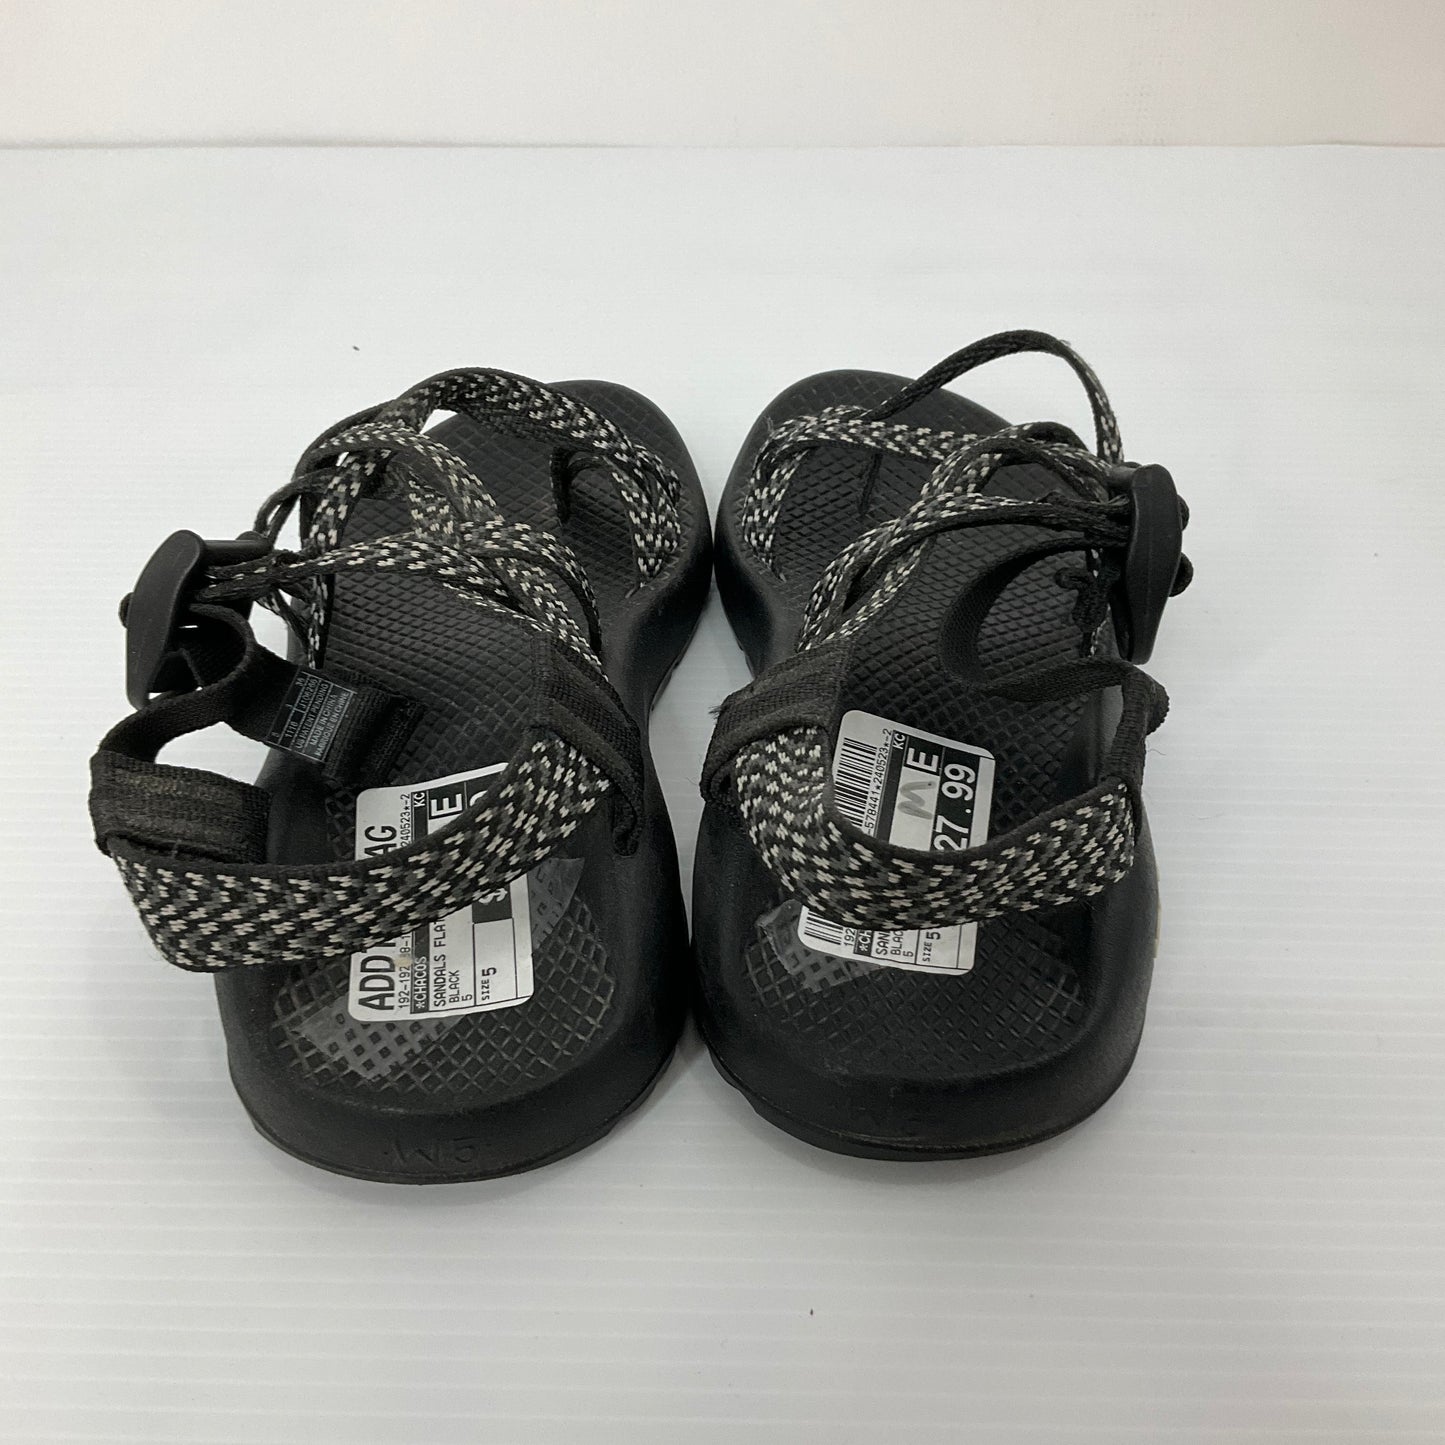 Black Sandals Flats Chacos, Size 5